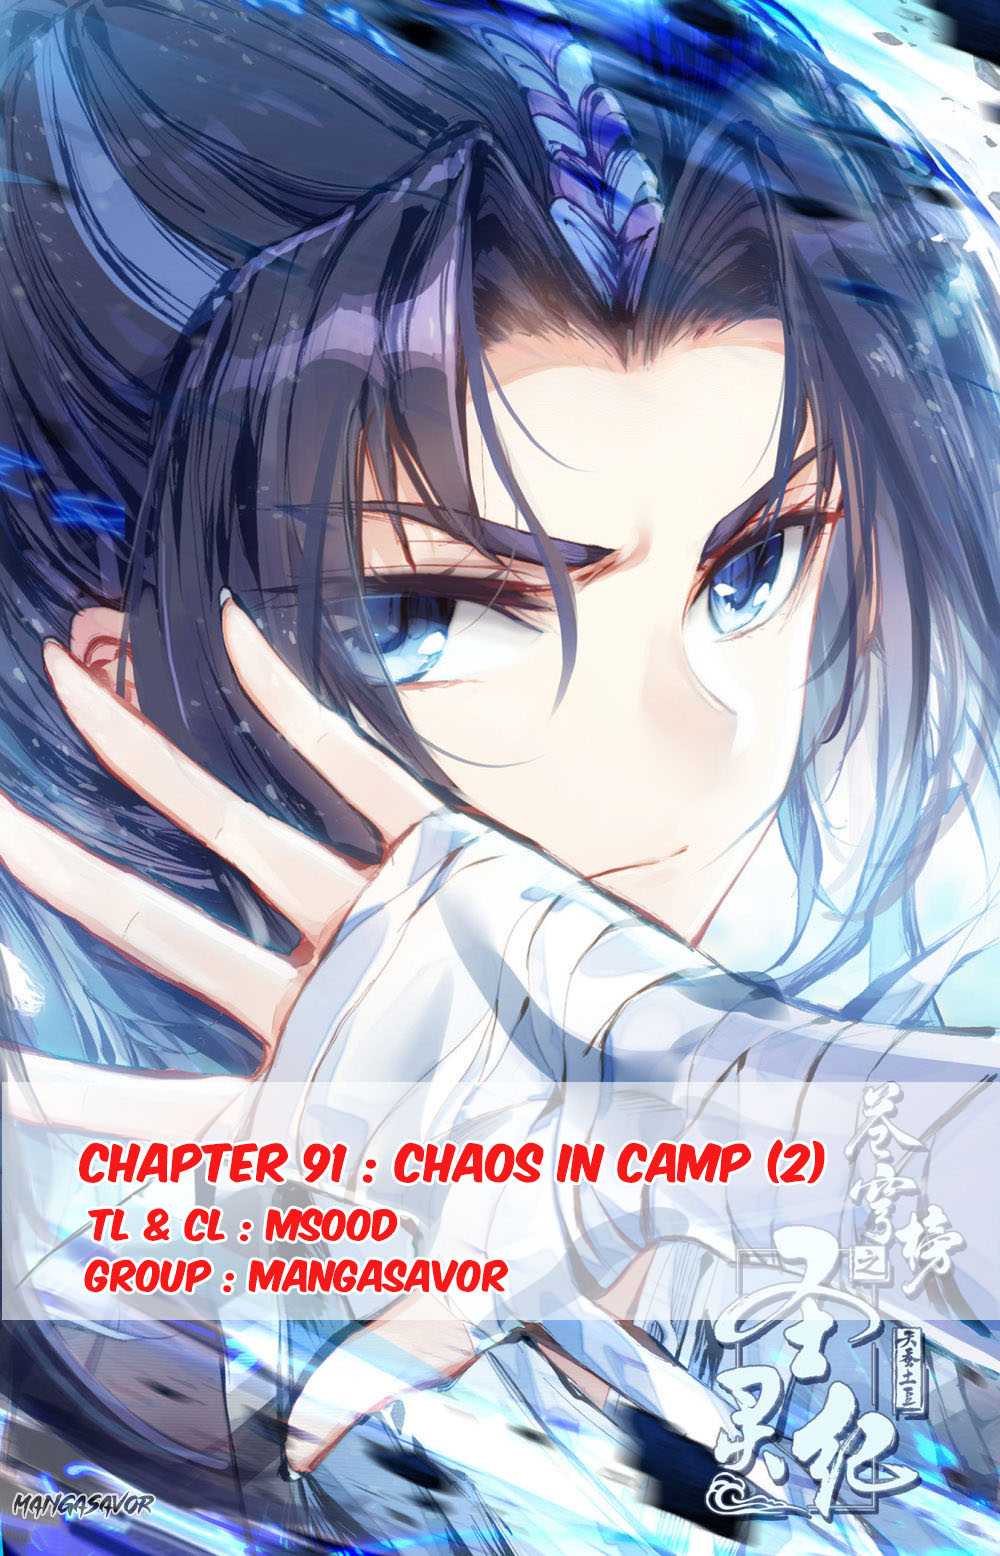 The Heaven's List Ch. 91.5 Chaos in Camp (2)